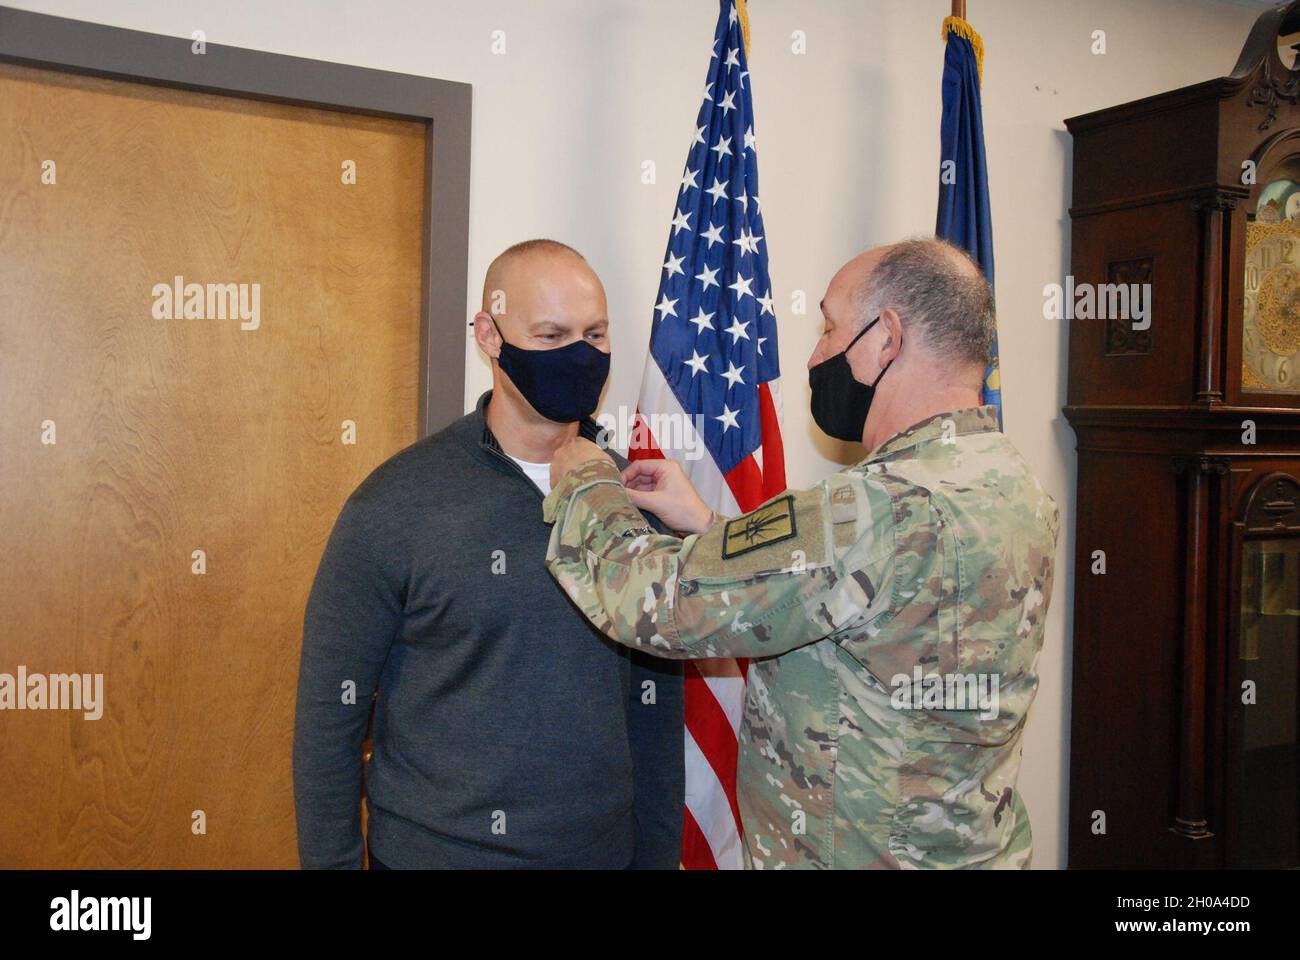 Retired New York Army National Guard Captain Kenneth Bombace, a Holbrook, New York resident, receives the Combat Action Badge from Col. Richard Goldenberg during a short ceremony held on Jan. 4, 2020 at New York Army National Guard headquarters in Latham, New York. Bombace was recognized for his involvement in an action which took place during a firefight in Samarra, Iraq on May 21, 2005 when he was assigned to the 642nd Military Intelligence Battalion and serving as the commander of the Police Assistance Team as part of the 42nd Infantry Division and Task Force Liberty. Through an oversight, Stock Photo